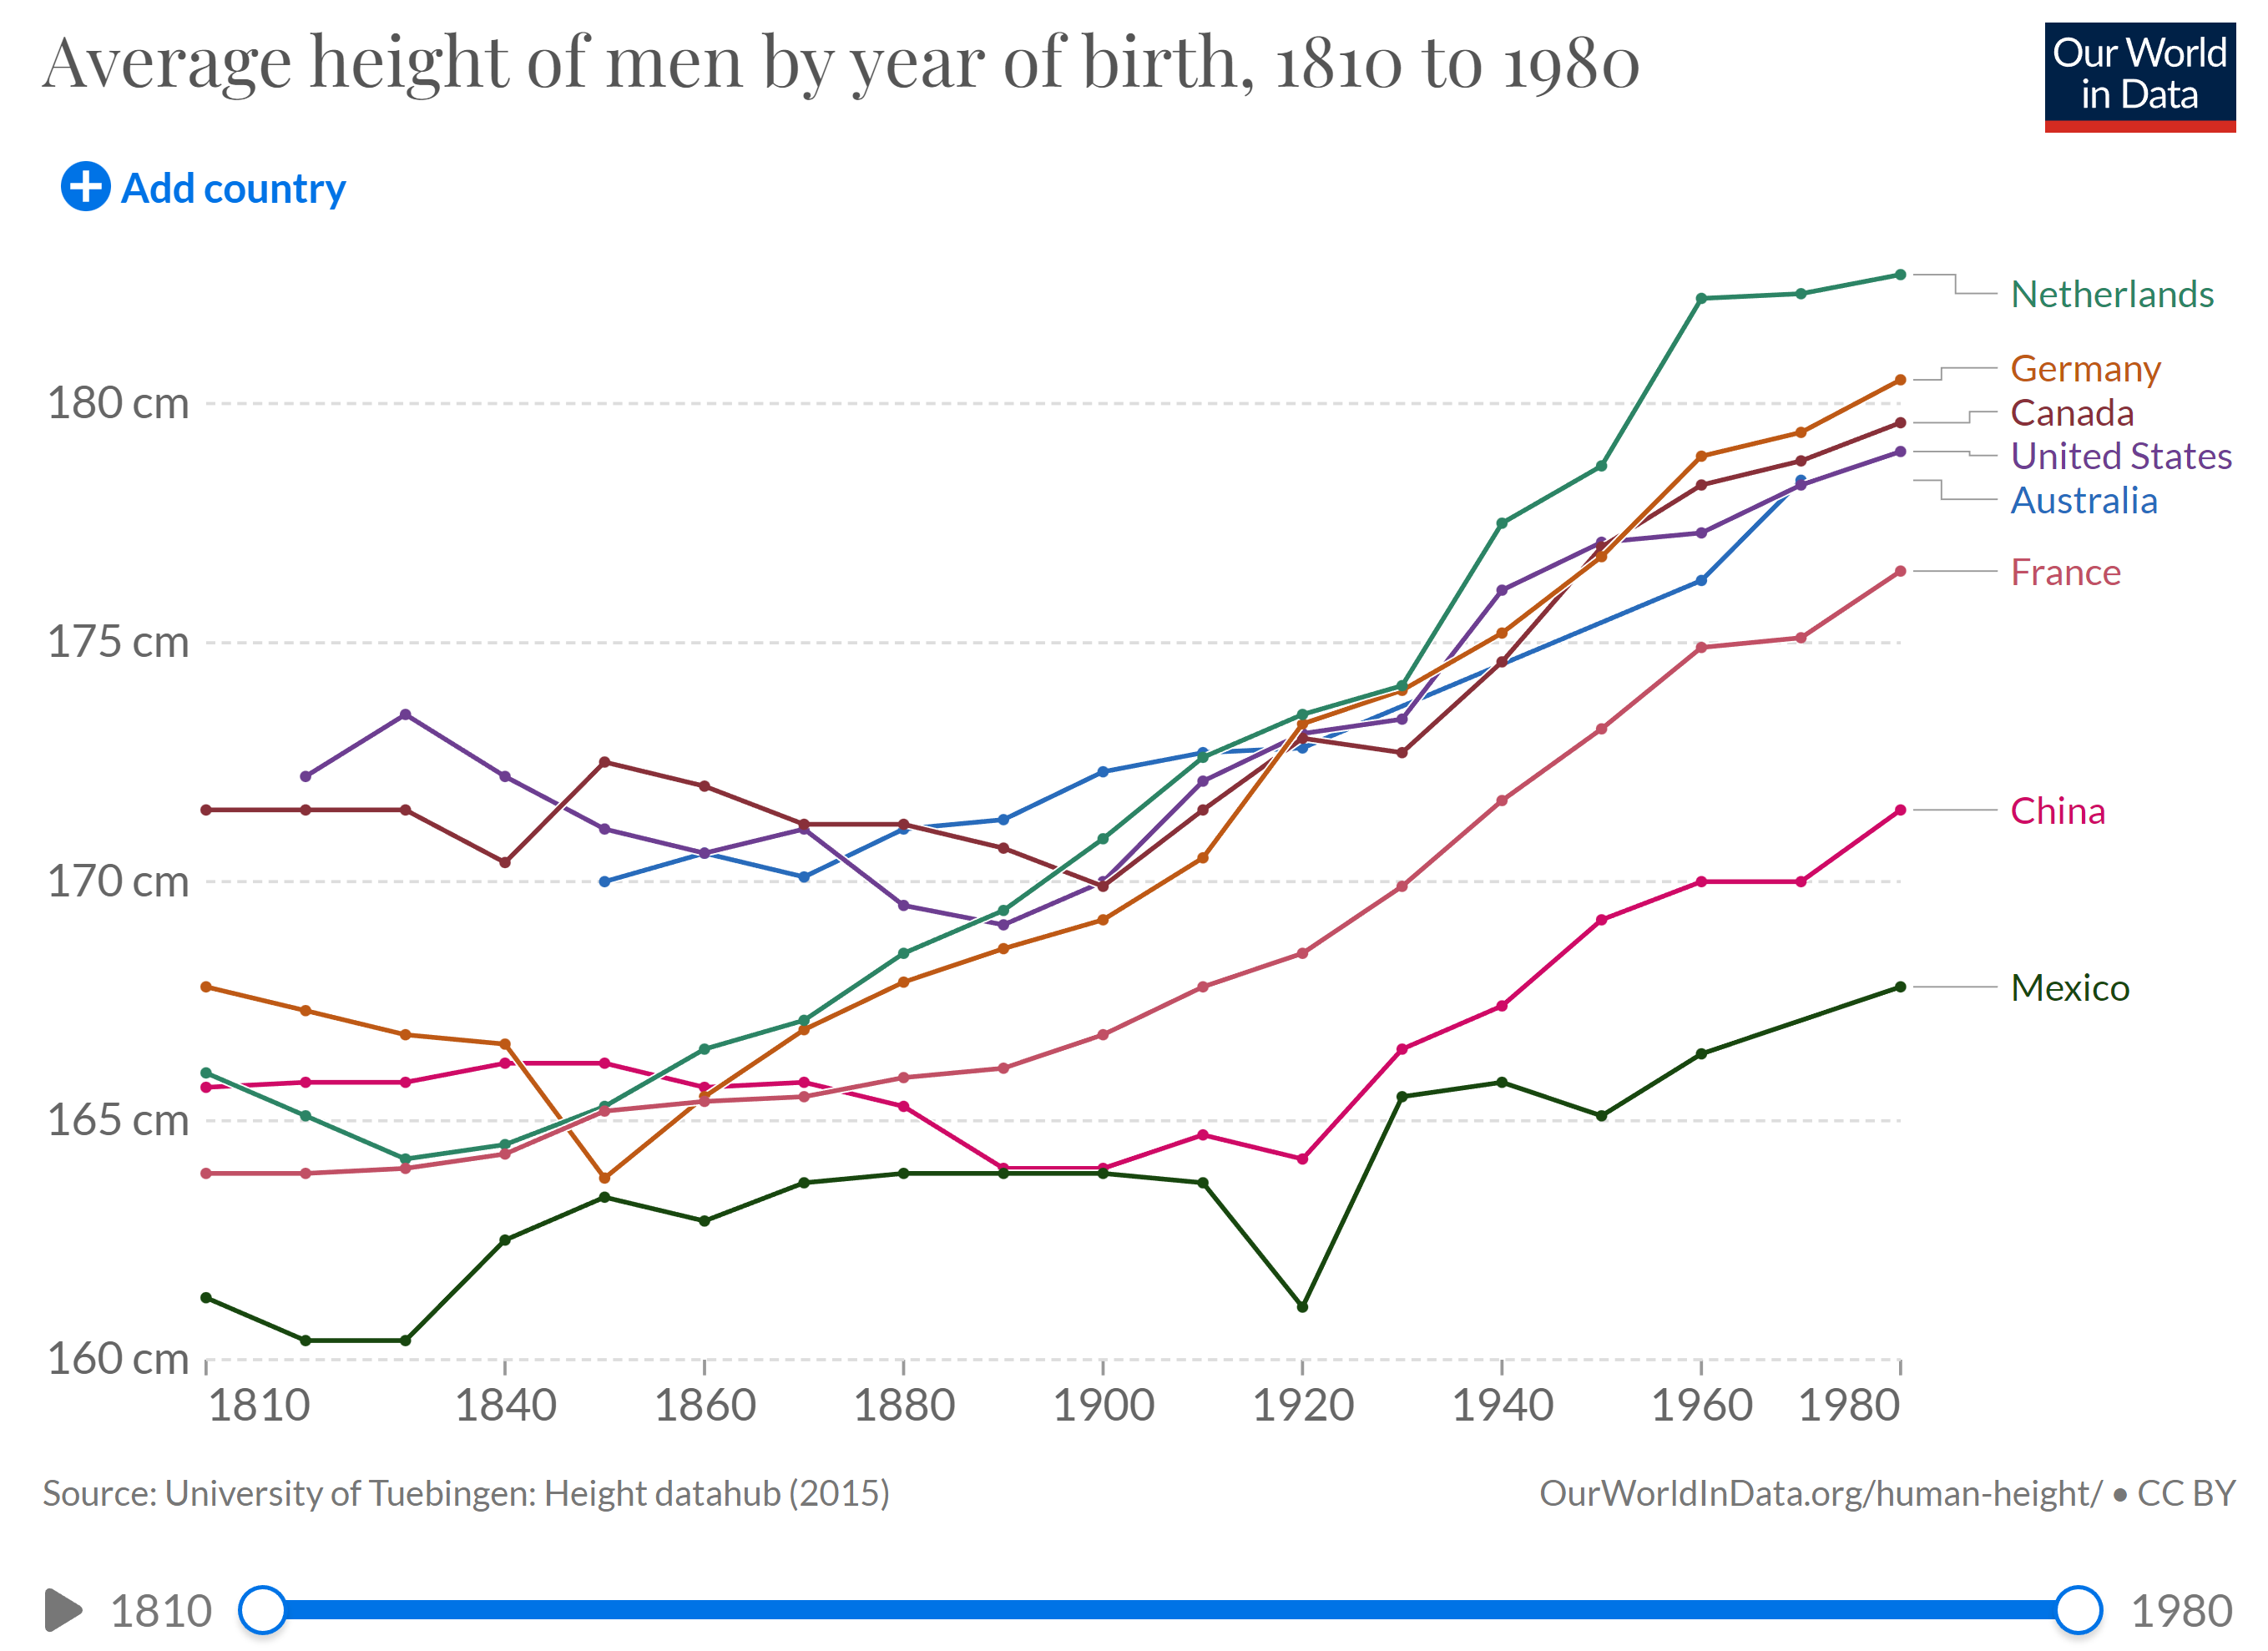 Average Height of Men Since 1810 to 1980, United States compared to Netherlands, Canada, Germany, Australia via OurWorldInData